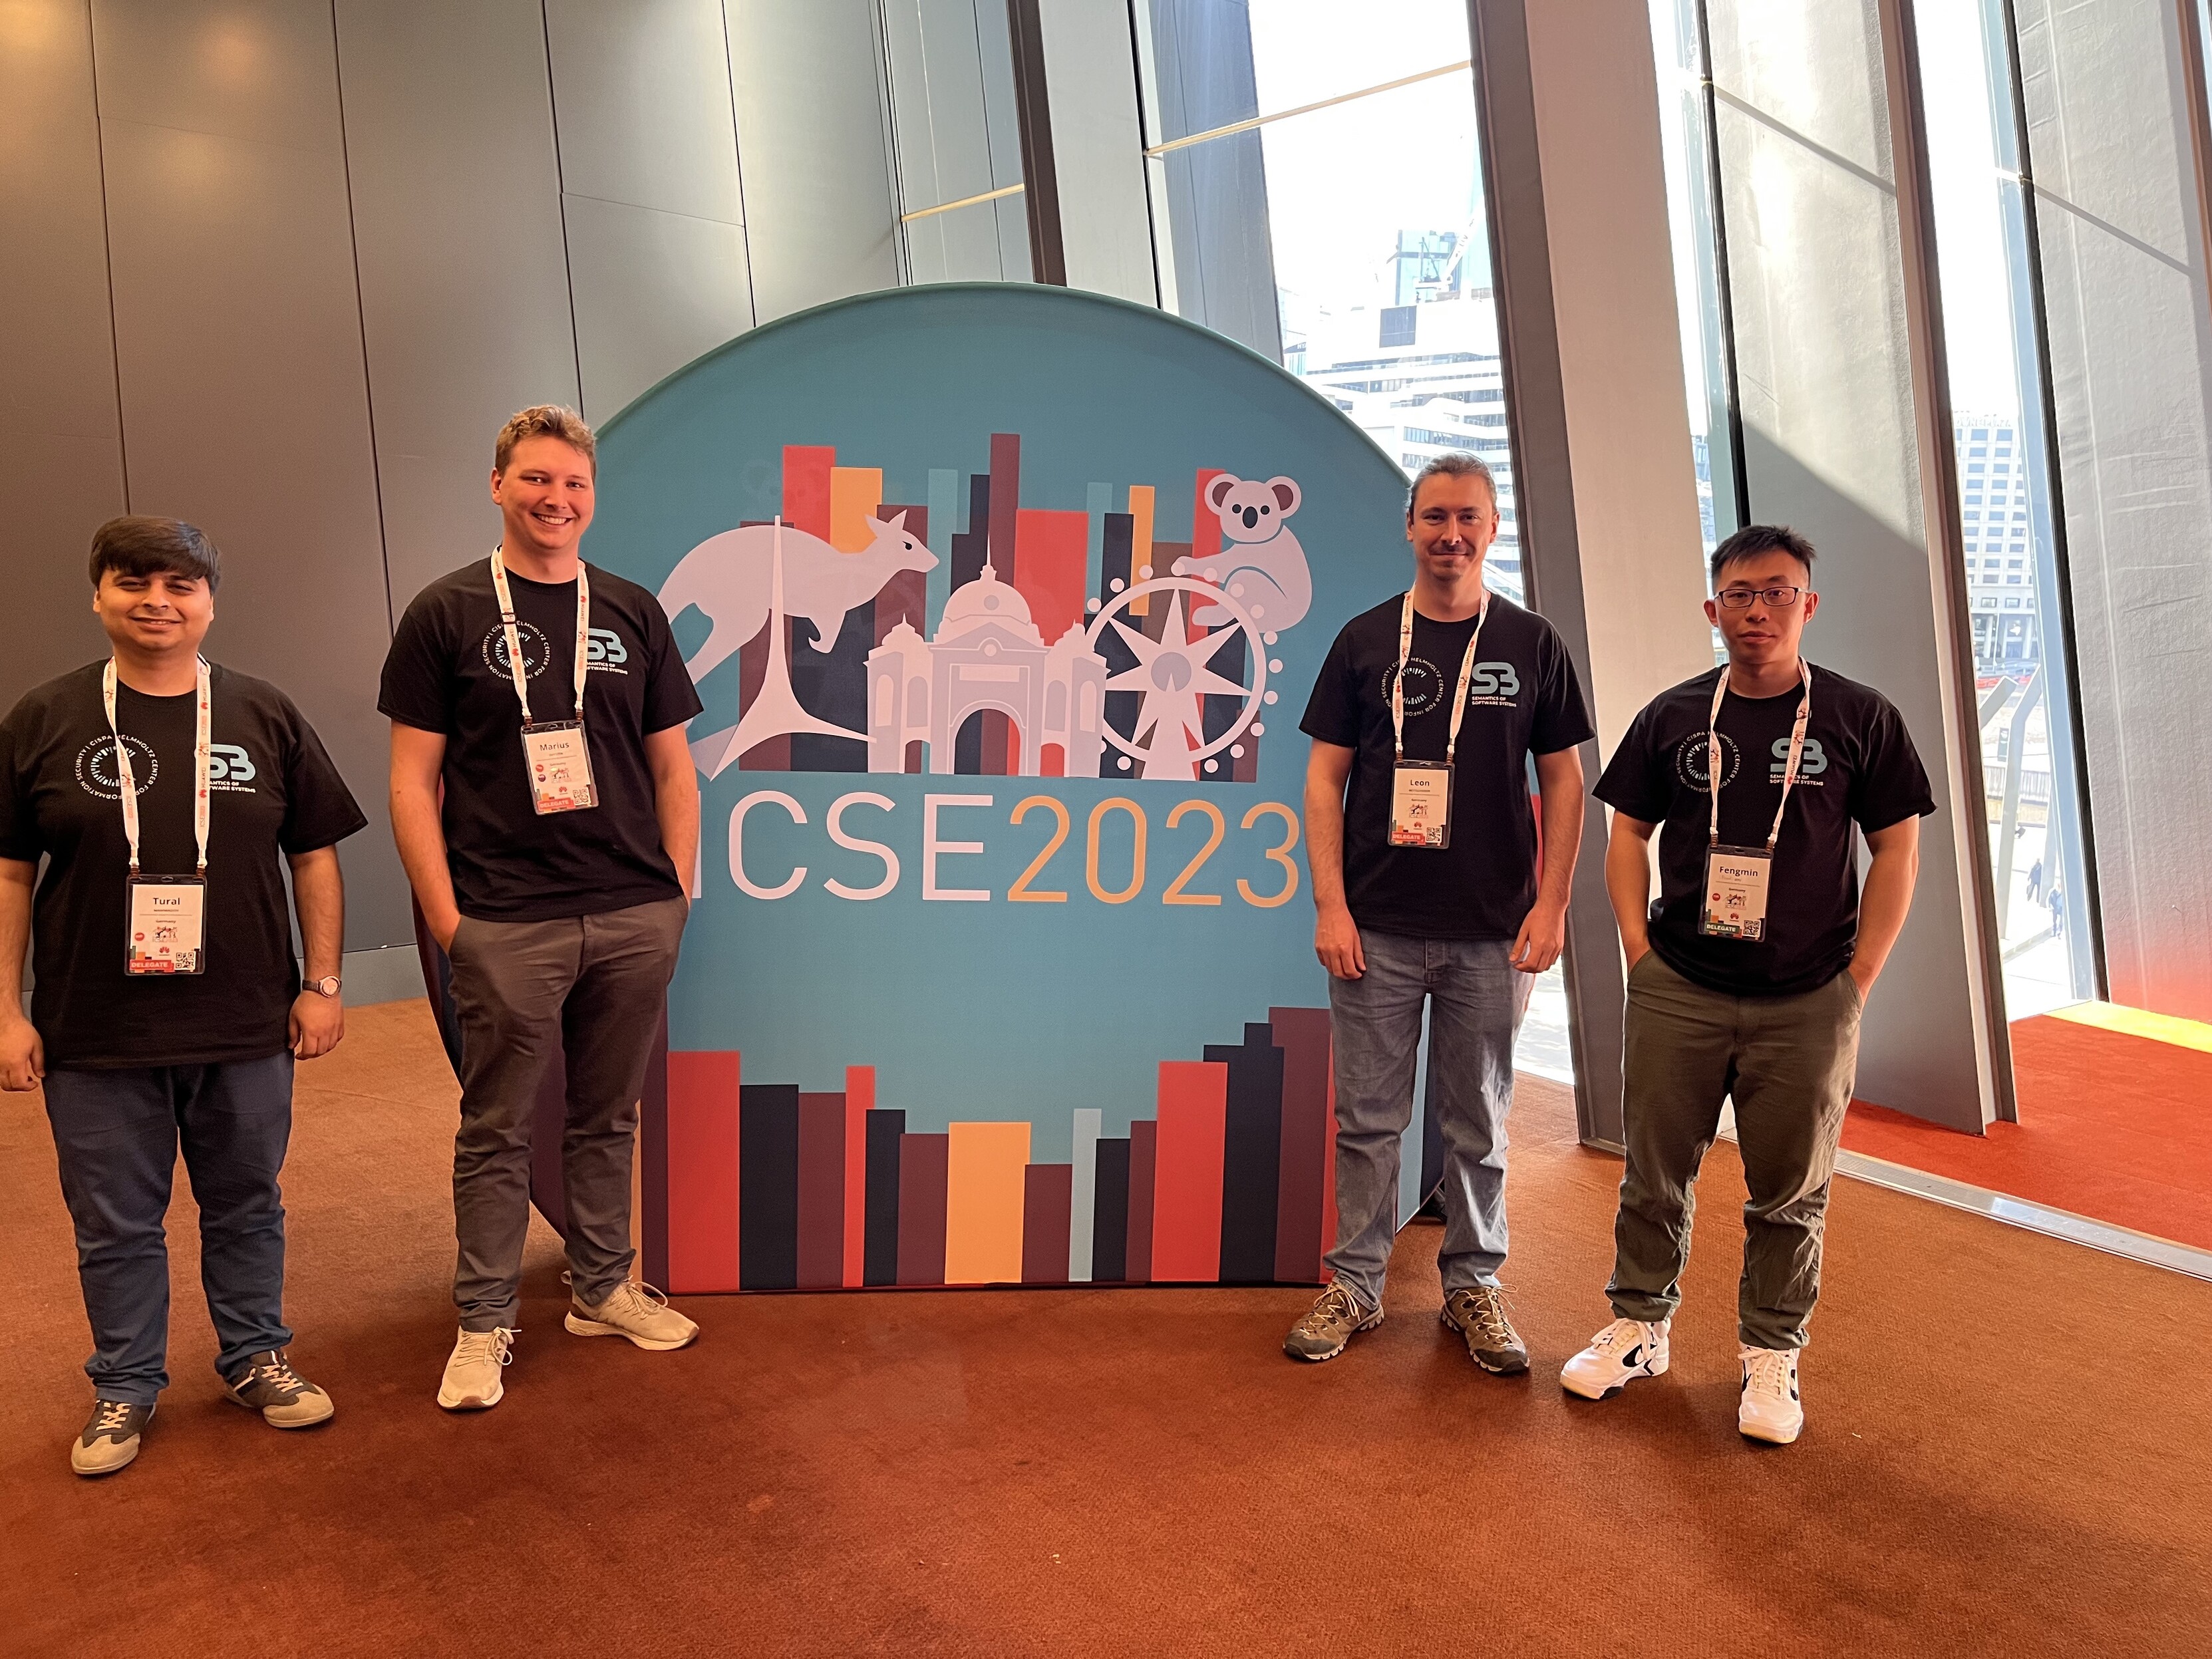 Tural Mammadov, Marius Smytzek, Leon Bettscheider, and Fengmin "Paul" Zhu at ICSE wearing a T-Shirt on which Andreas Zeller advertises Post-Doc positions